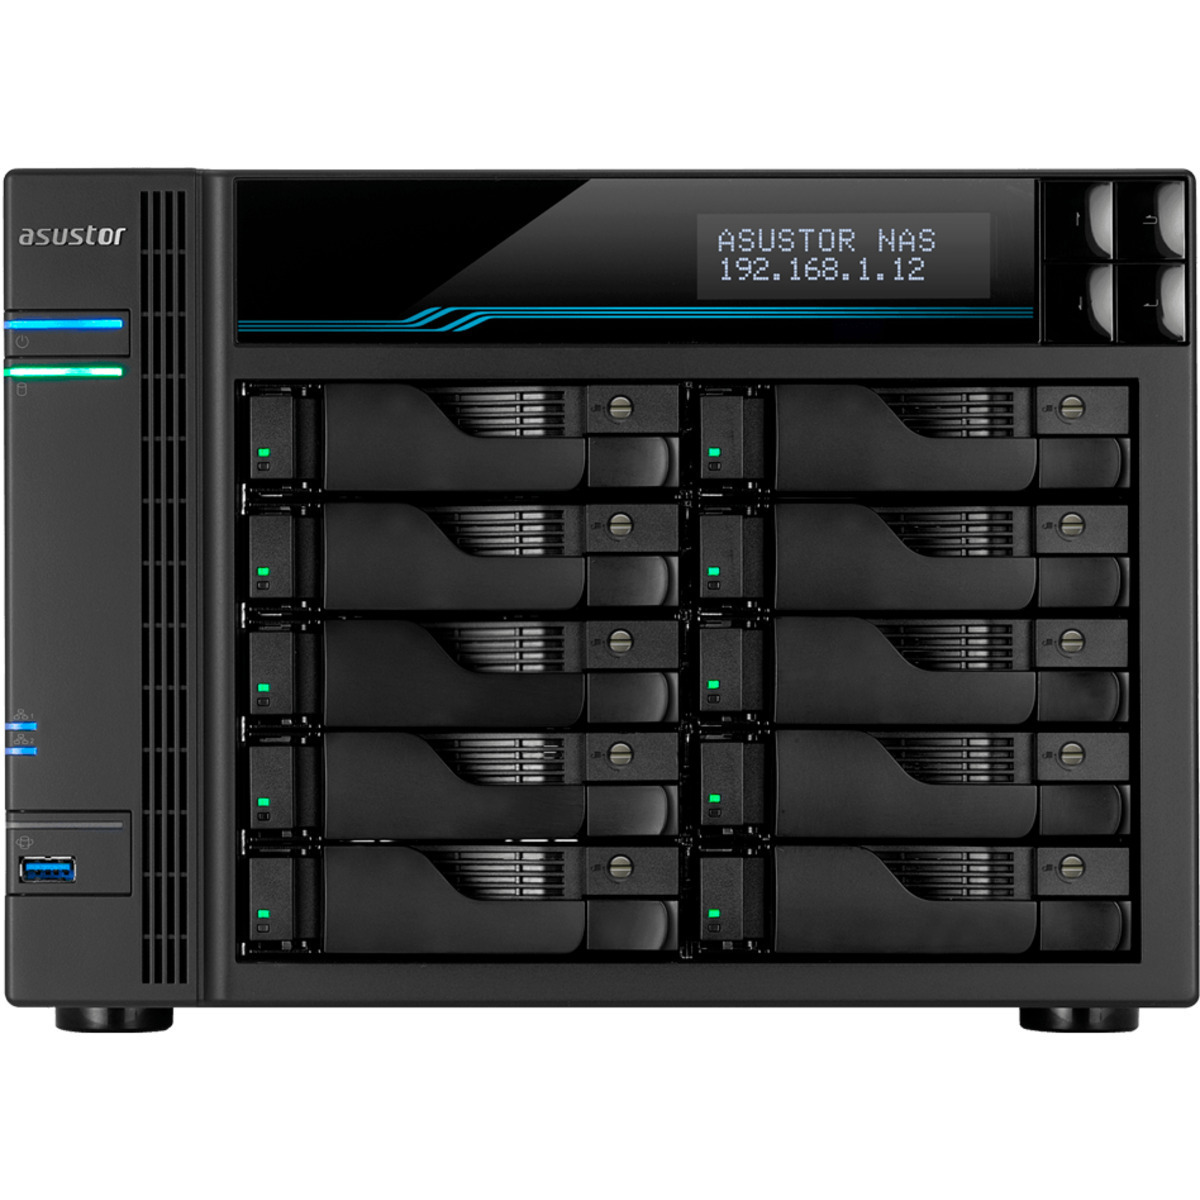 ASUSTOR AS6510T Lockerstor 10 144tb 10-Bay Desktop Multimedia / Power User / Business NAS - Network Attached Storage Device 9x16tb Seagate IronWolf Pro ST16000NT001 3.5 7200rpm SATA 6Gb/s HDD NAS Class Drives Installed - Burn-In Tested - ON SALE - FREE RAM UPGRADE AS6510T Lockerstor 10